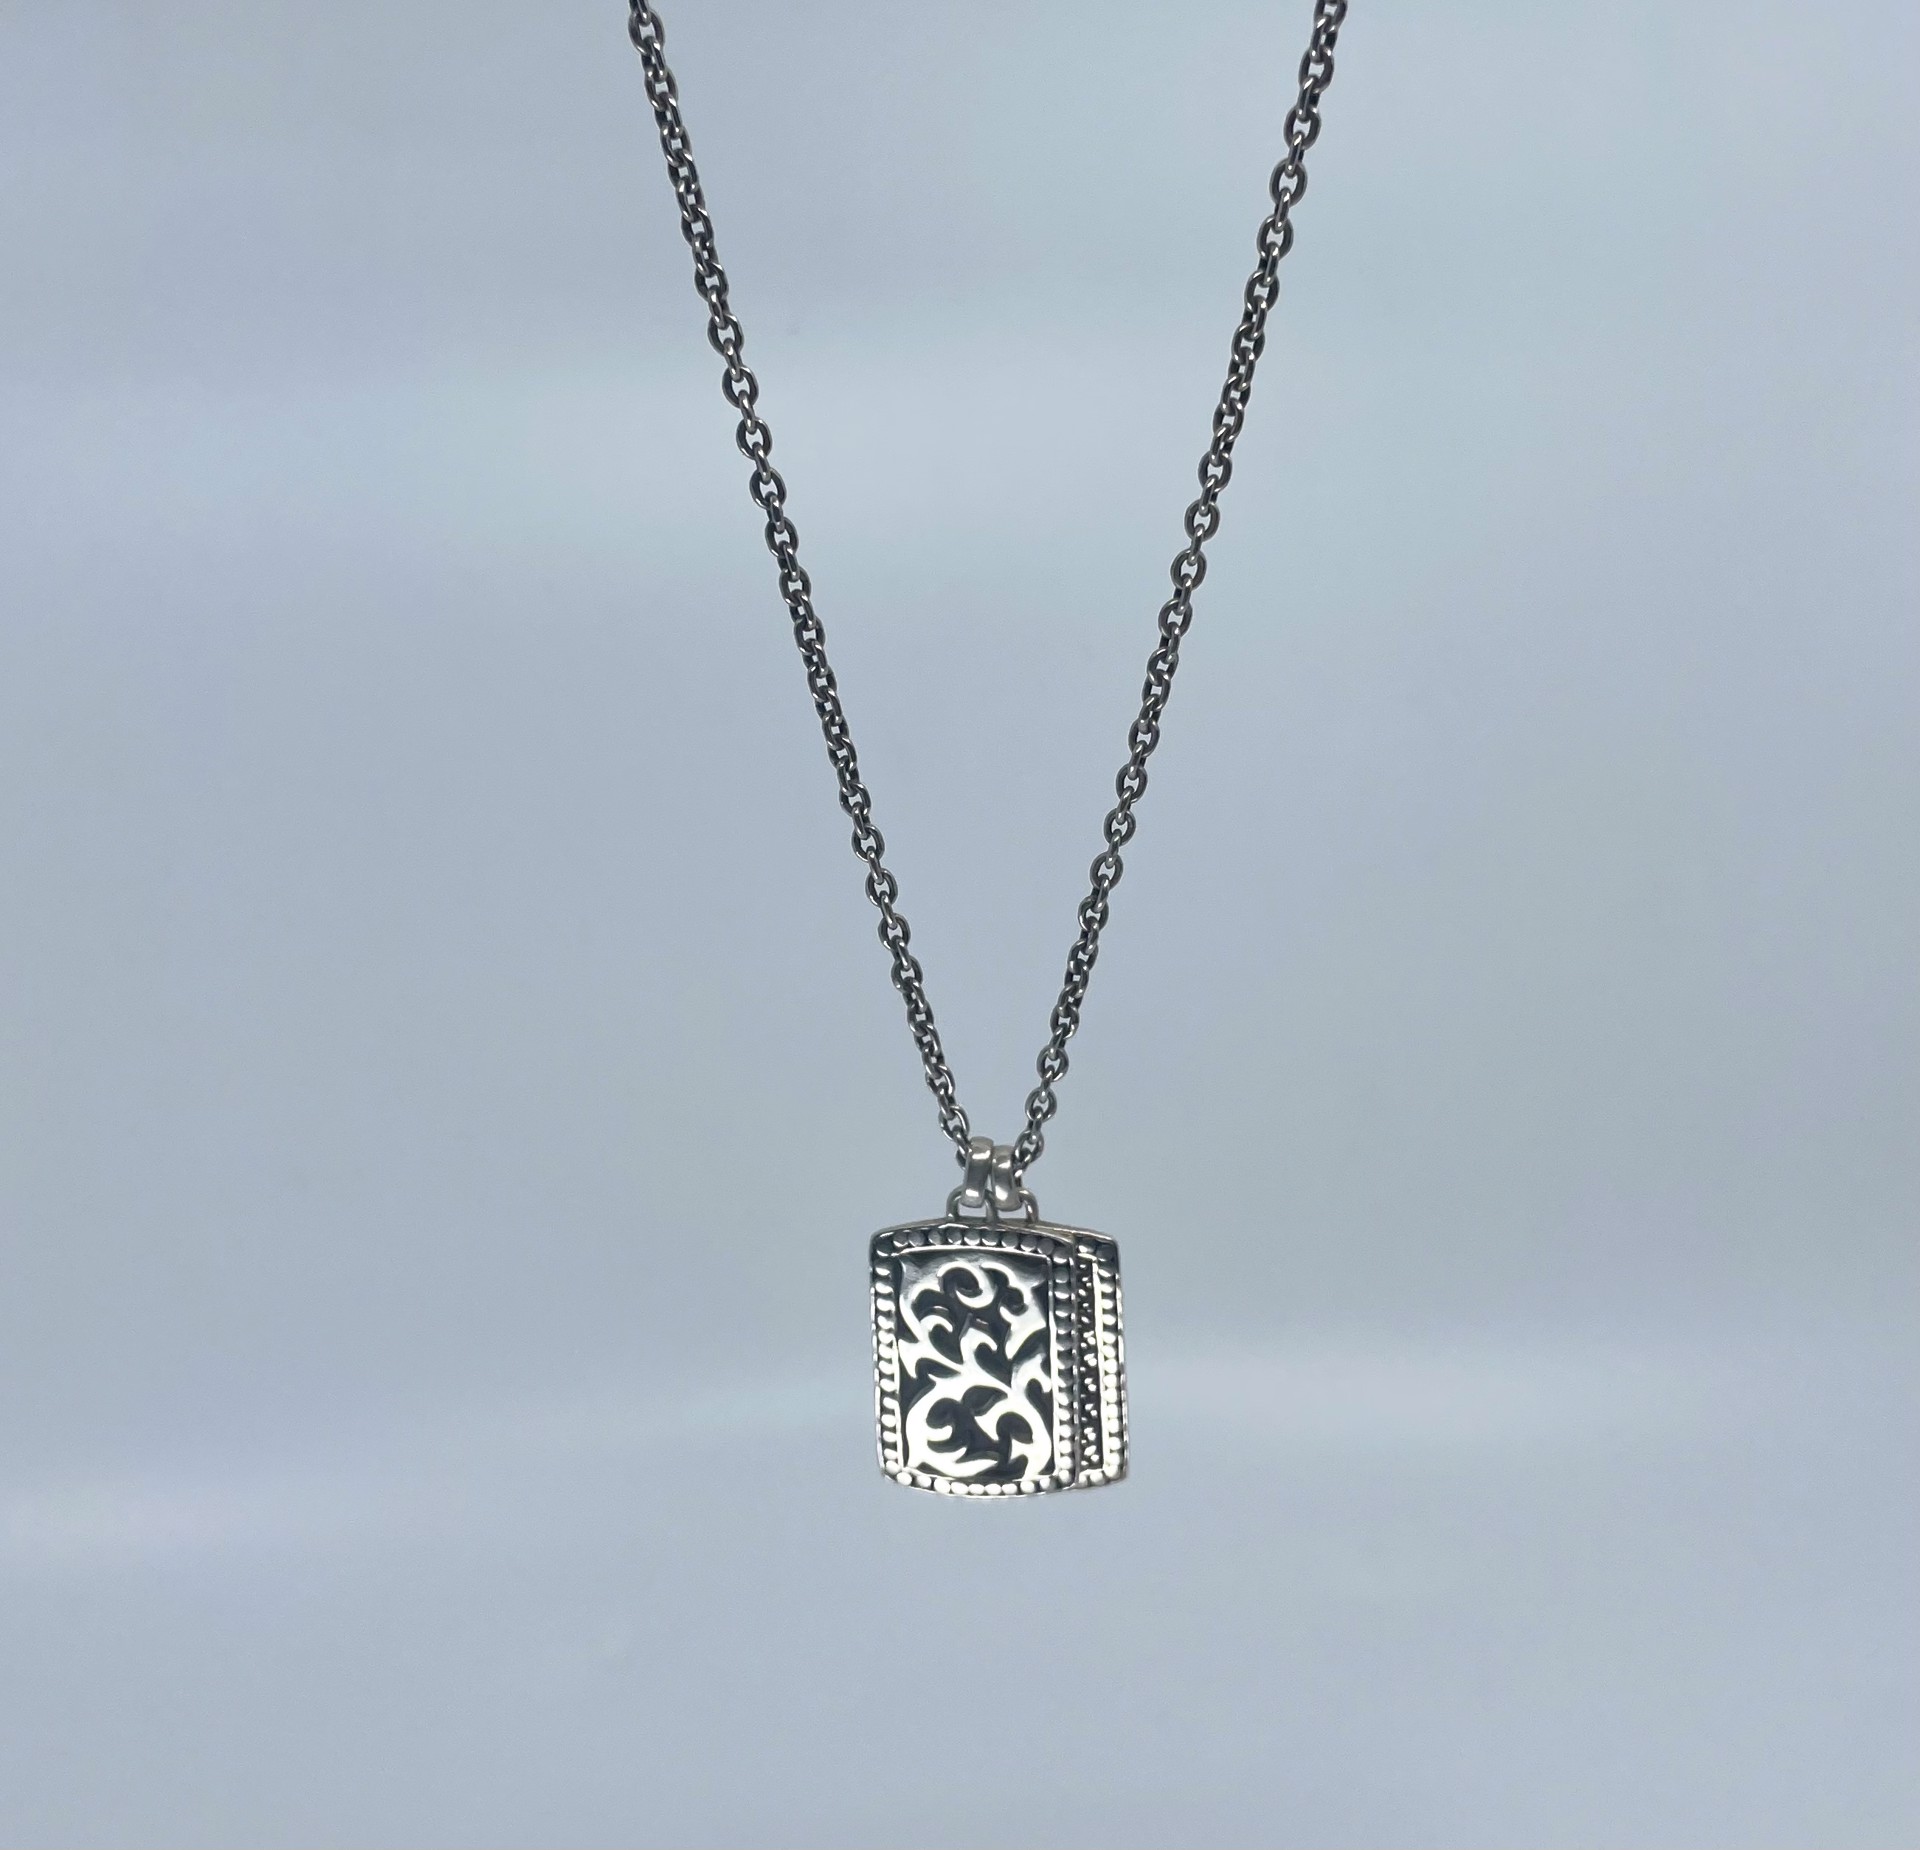 1039 Dog Tag style Necklace. MN1003-20344 by Lois Hill